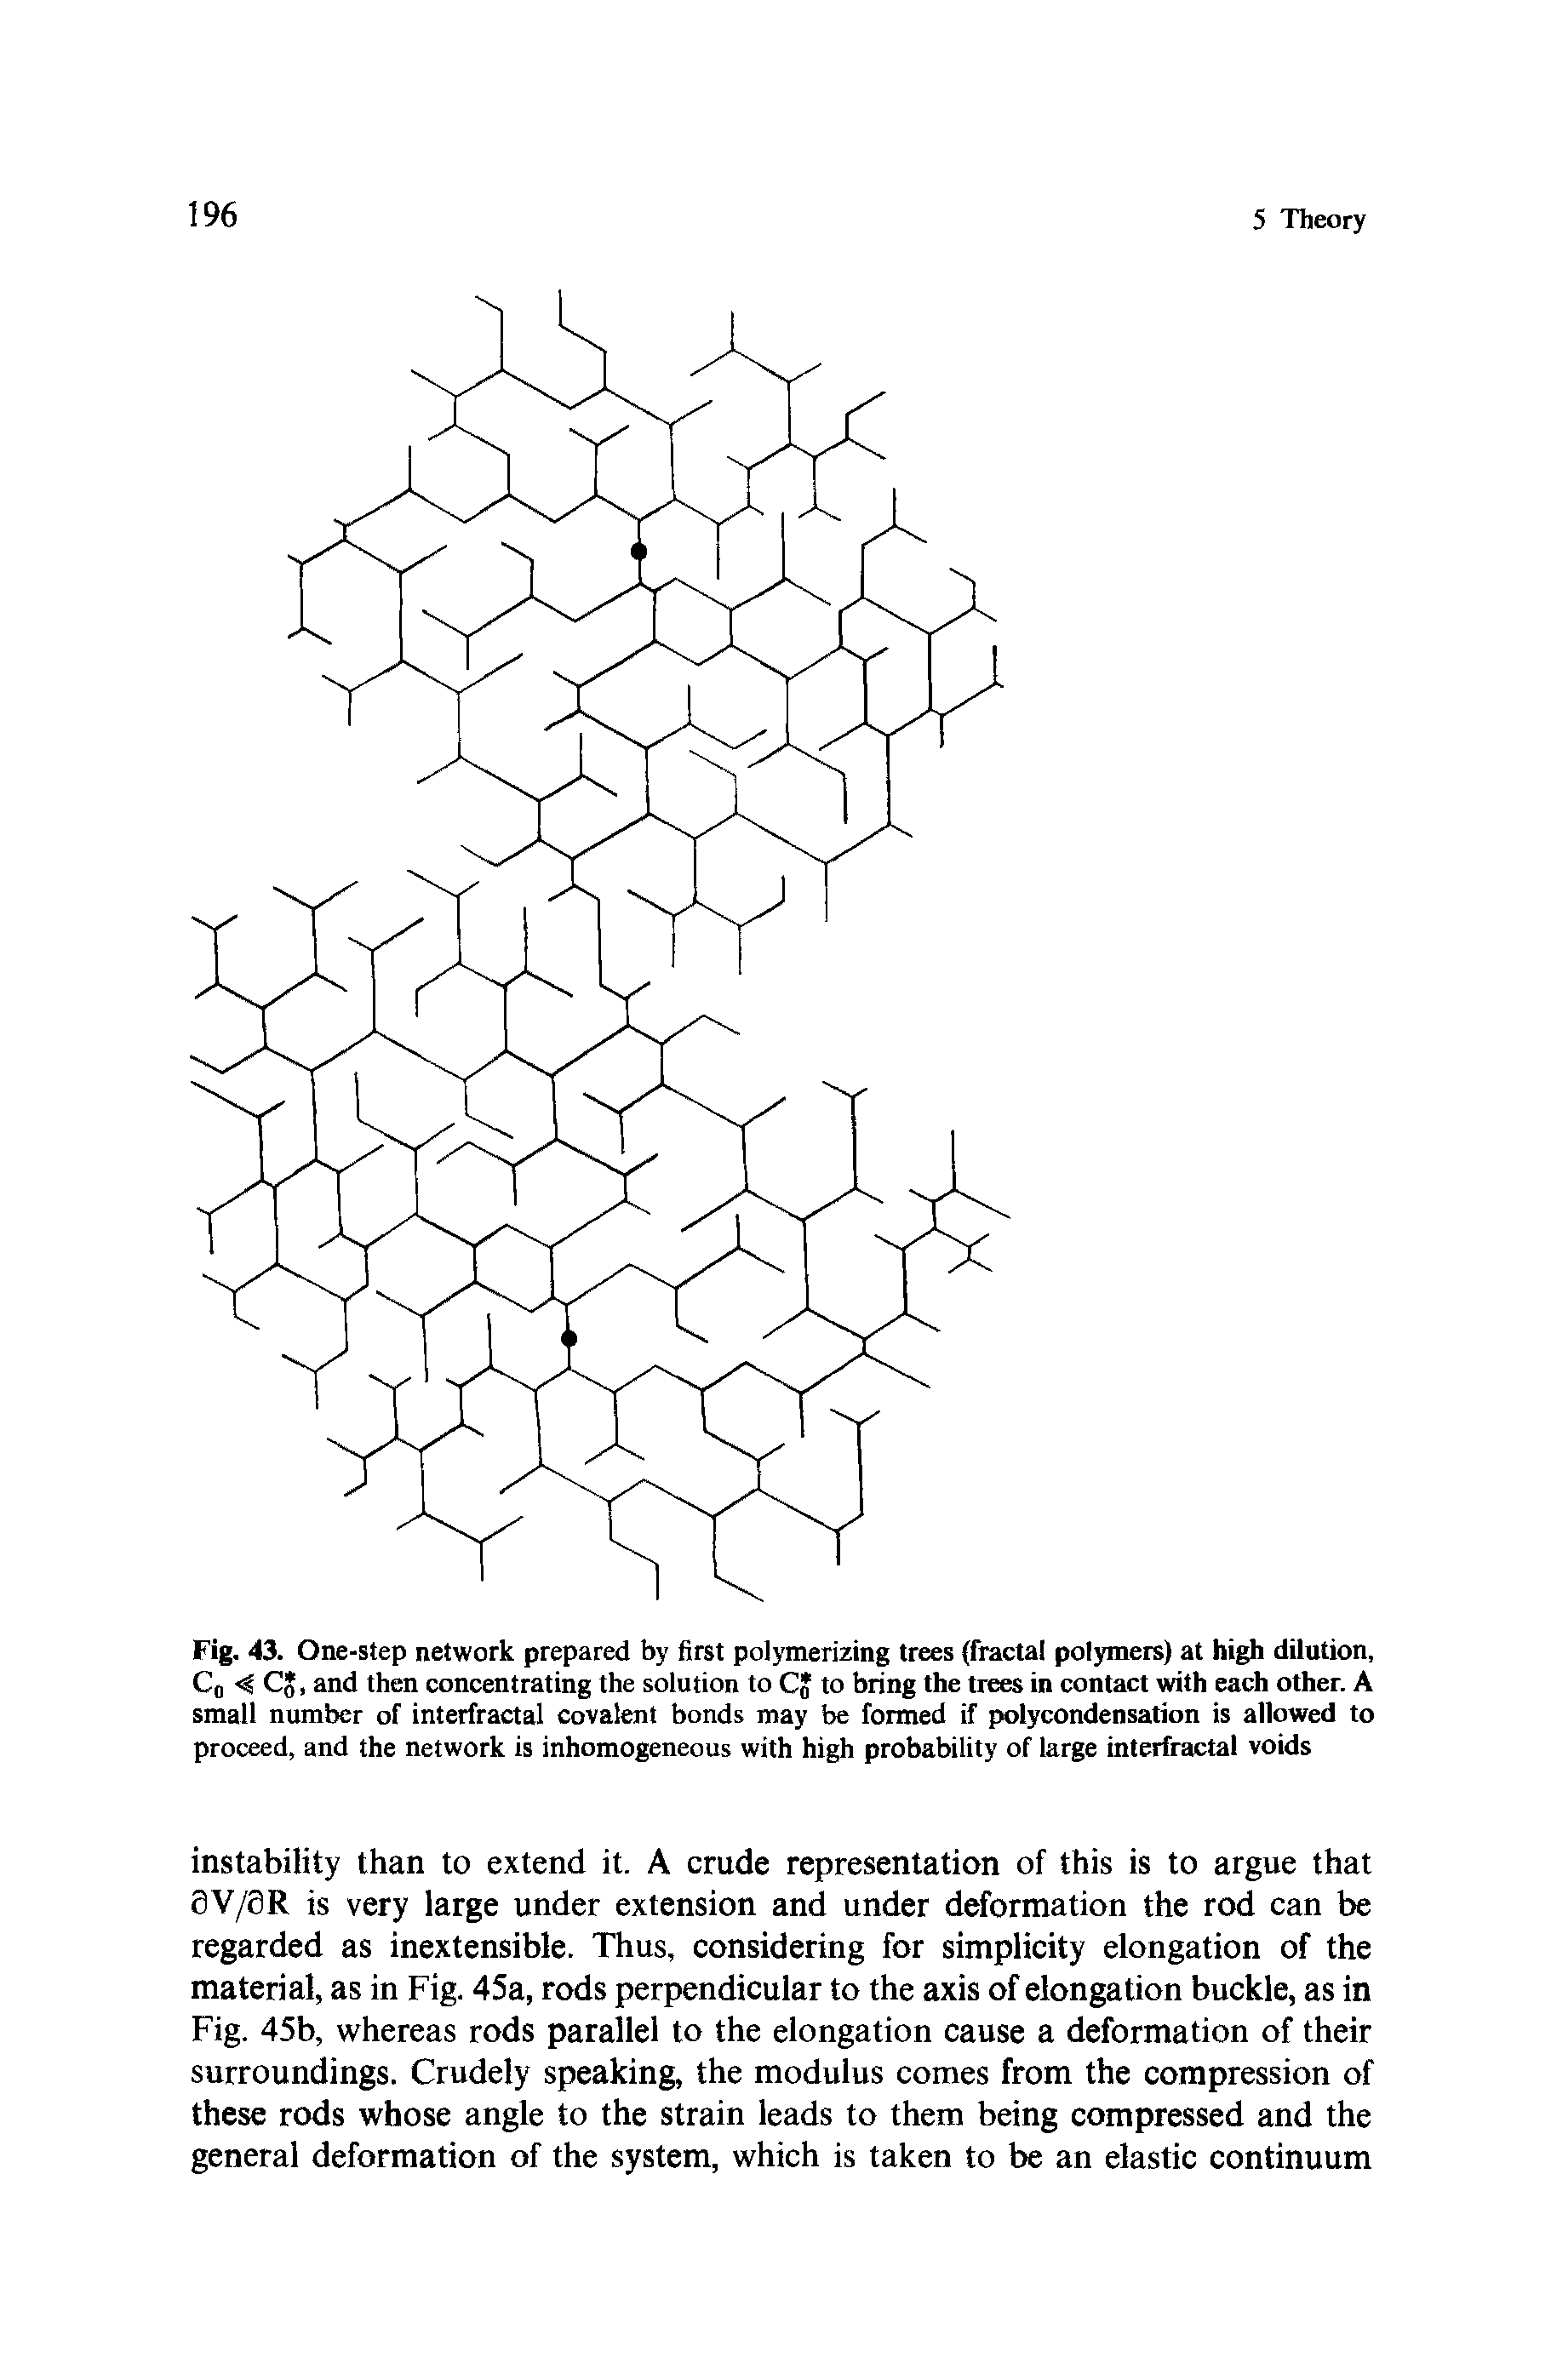 Fig. 43. One-step network prepared by first polymerizing trees (fractal polymers) at high dilution, Co < C. and then concentrating the solution to C to bring the trees in contact with each other. A small number of interfractal covalent bonds may be formed if polycondensation is allowed to proceed, and the network is inhomogeneous with high probability of large interfractal voids...